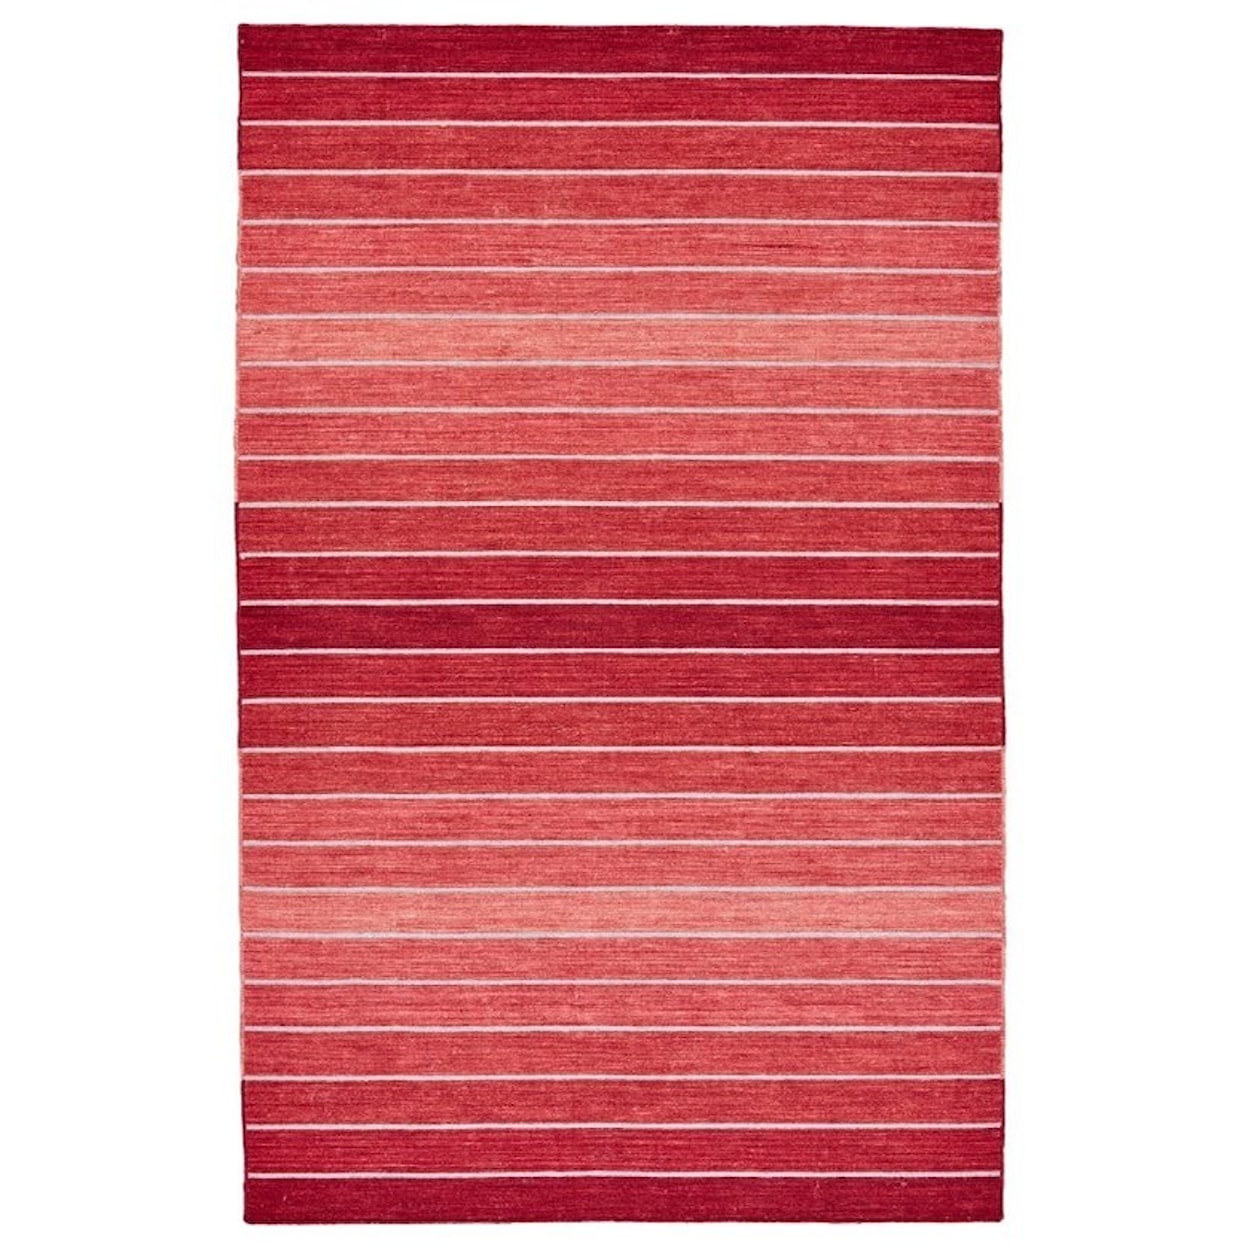 Feizy Rugs Santino Red 2' x 3' Area Rug